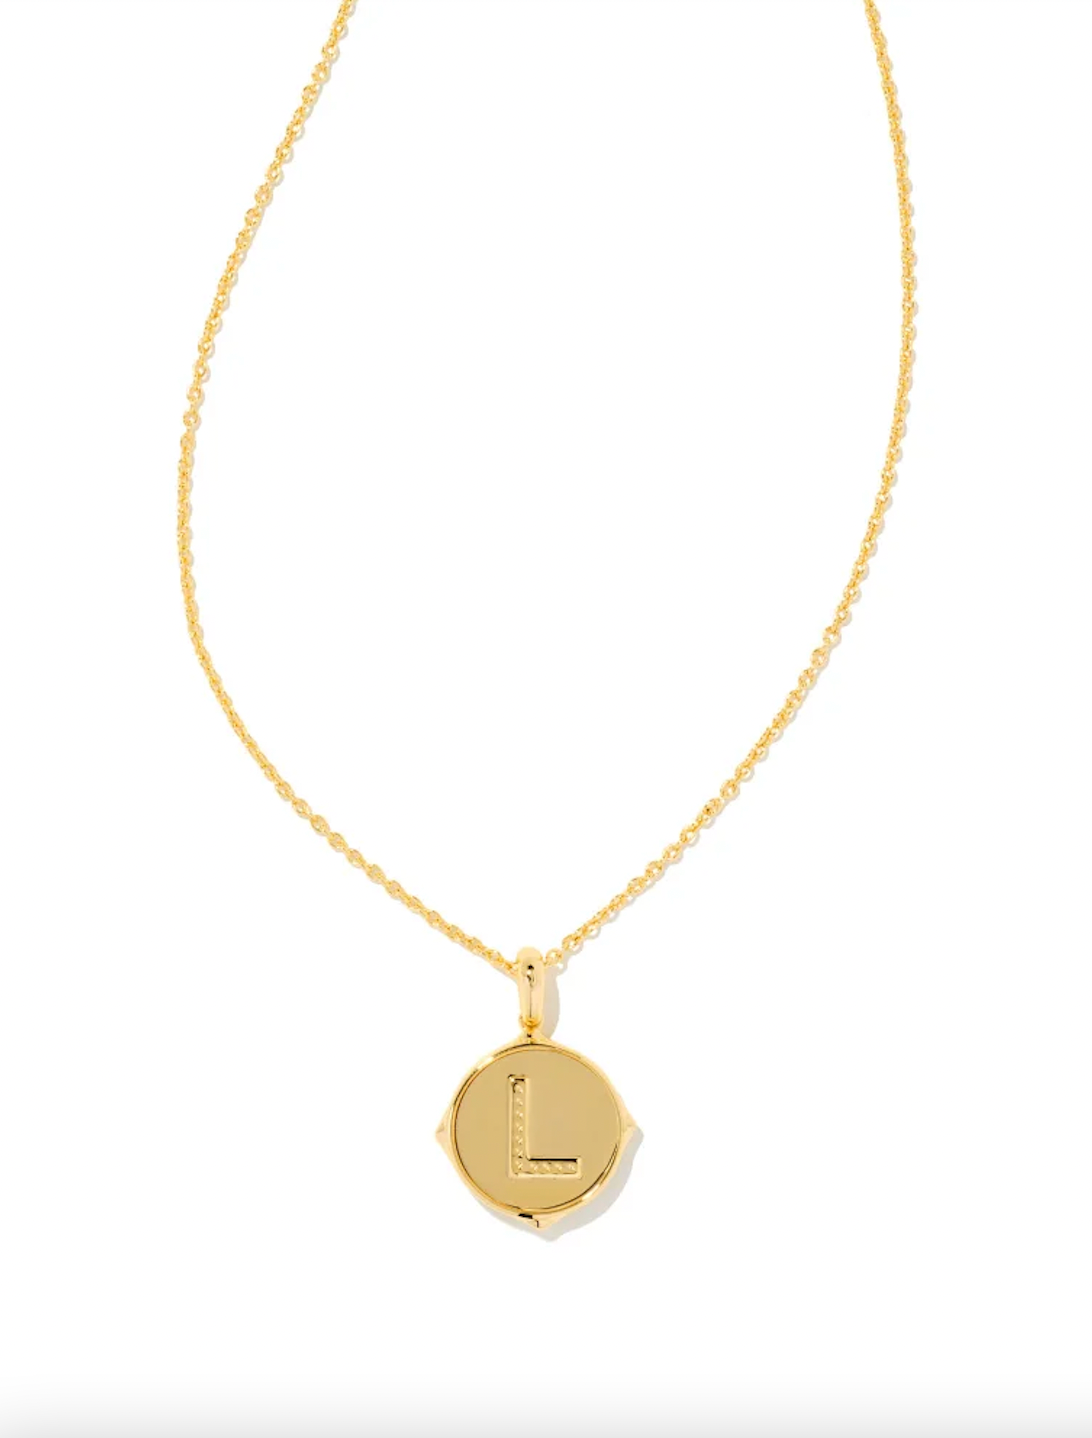 KENDRA SCOTTLETTER L DISC PENDENT NECKLACE GOLD IRIDESCENT ABALONE